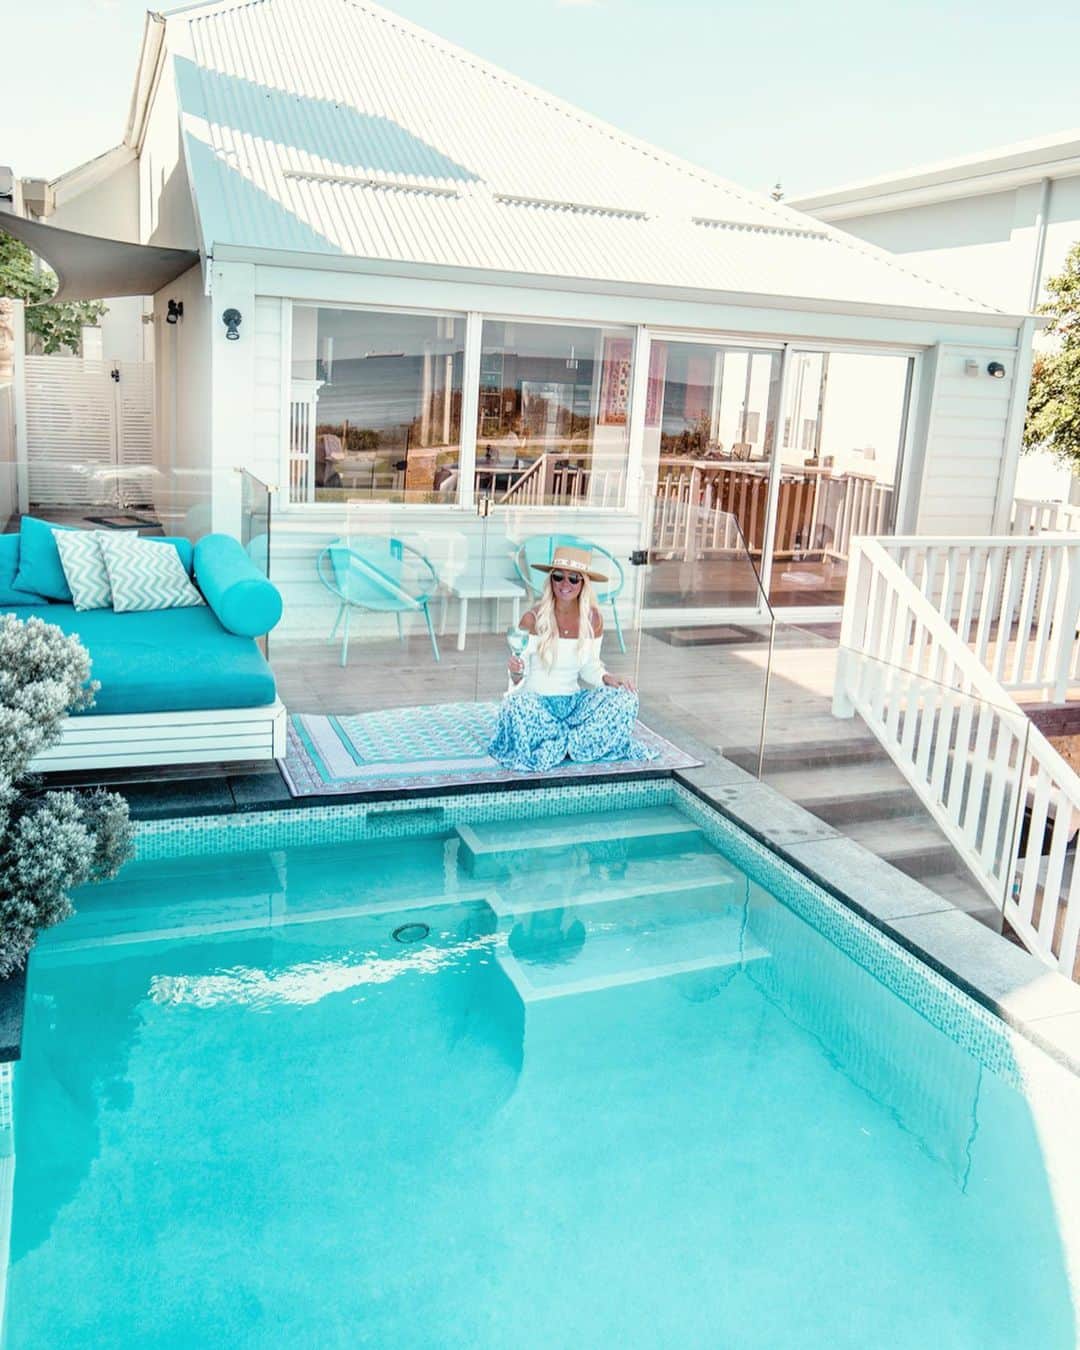 さんのインスタグラム写真 - (Instagram)「Who knew traveling only 20 minutes from home could transport you so far away and bring all the vaycay vibes required ☀️ . We’ve loved every single minute of our @executive_escapes family staycay at the Cottesloe Beach house 🐚 it’s been the ultimate recharge for all of us. This 3 bed, 2 bath luxury beach house was actually built back in 1906. Whilst keeping its charm, it has since been renovated into an open plan, light filled, neutral space with a beautiful outdoor area featuring a stunning solar heated plunge pool overlooking the ocean 🌊 . We’ve been so blessed with so much magic these past few days 🌈 from waking up to a double rainbow on the beach at sunrise and dancing in the rain as it absolutely poured down on us 😂 to watching the moon rise as the sun glistened over the ocean 🌝✨ enjoying multiple golden sunsets with these infinity pool views, and we even caught a glimpse of a local osprey flying as it landed in its nest 🦅 . Cottesloe will always hold a special place in our hearts 💛 this is where @bobbybense and I were married almost 12 years ago. Every time we visit we make sure to go back to our special spot and reminisce 💫 Check my Cottesloe story highlights for all the action from our wonderful week 💛 . Who else loves a good staycay? . 📸 @bobbybense | Swipe for more pics 🌈 . #ExecutiveEscapesPerth #cottesloe #cottesloebeach #sunsetbeach #sunset_pics #gllsunsets #yumikim #seeaustralia #seeperth #experienceperth #seeaustralia #justanotherdayinwa #westernaustralia #staycay #staycation #travellight #travelblogger #iamtb #wonderful_places #beachesnresorts #beautifuldestinations #luxurytravel #familytravel #doublerainbow #rainbow #djiglobal」8月19日 20時13分 - helen_jannesonbense